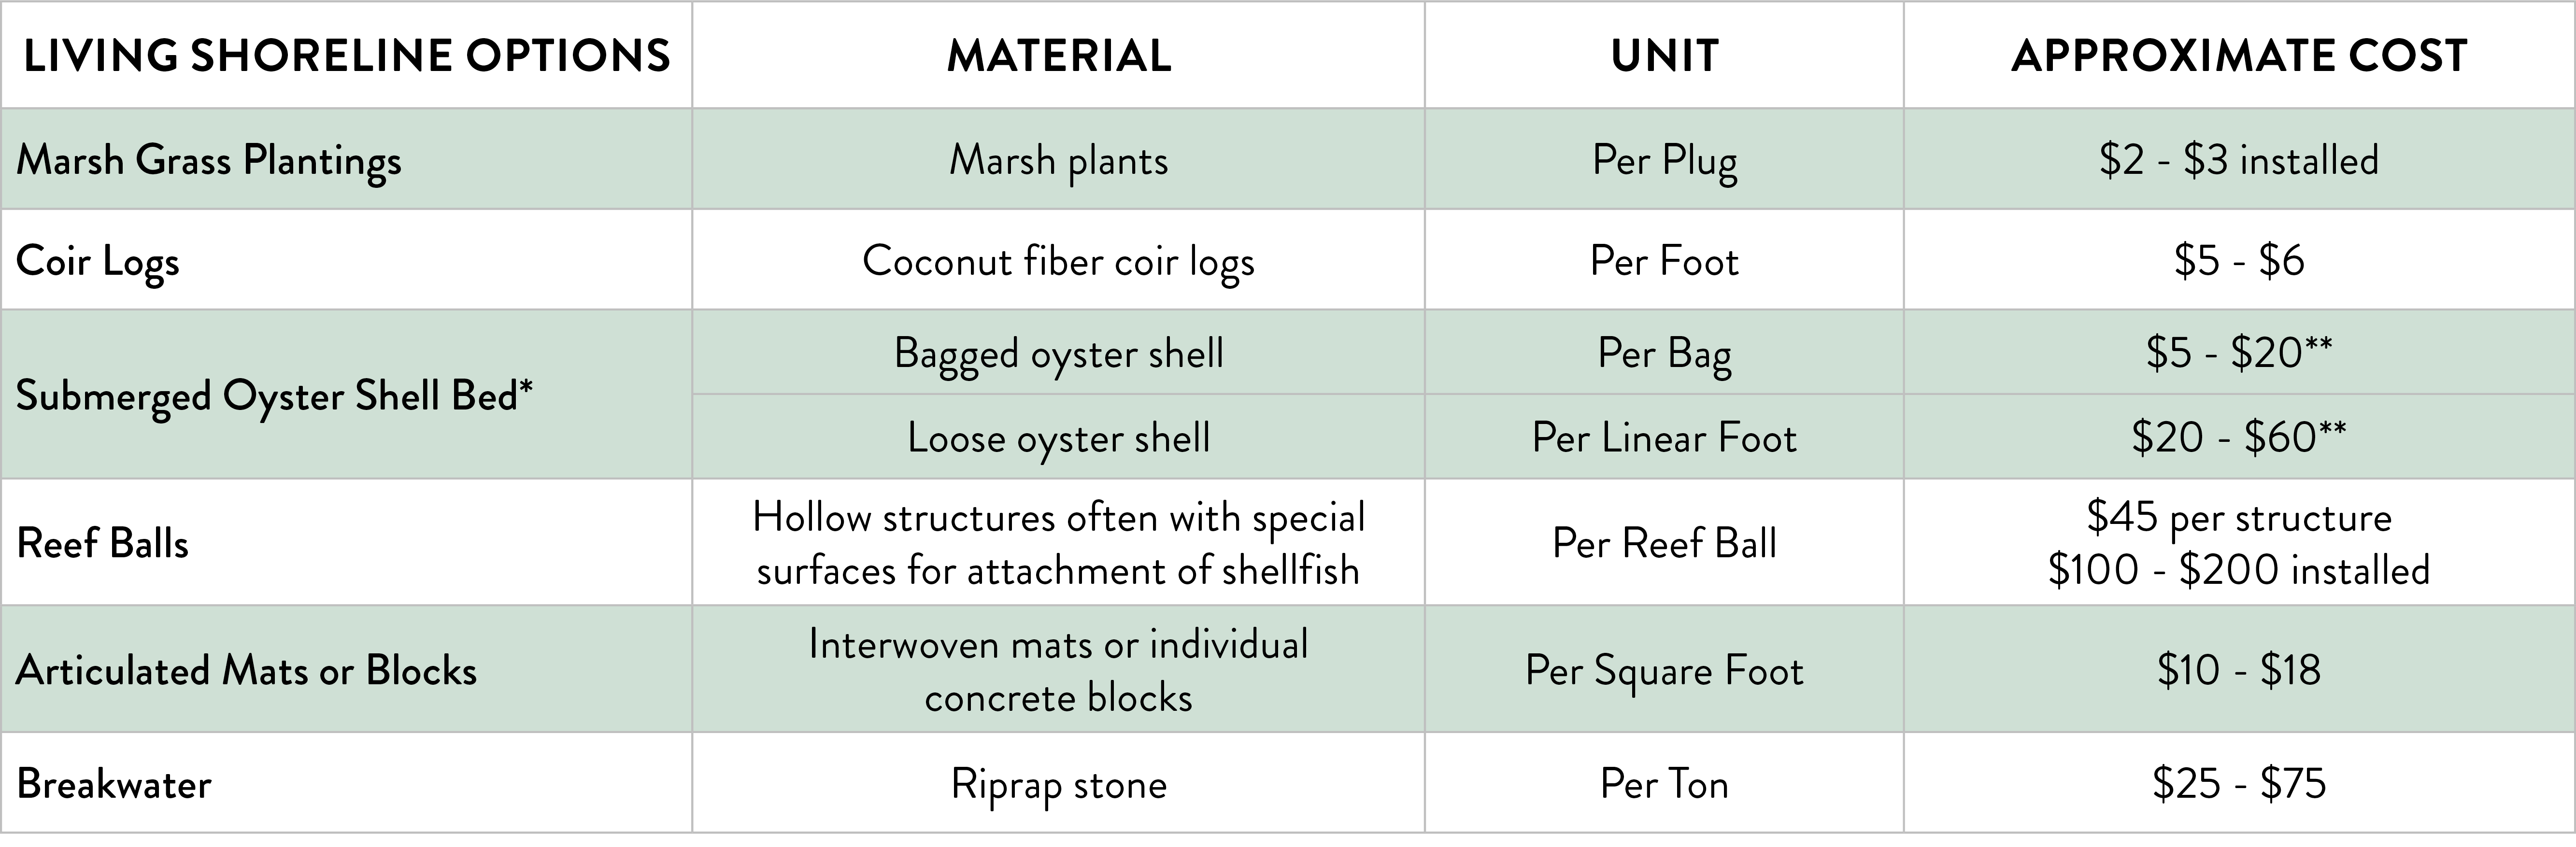 Living Shoreline Material Costs Table